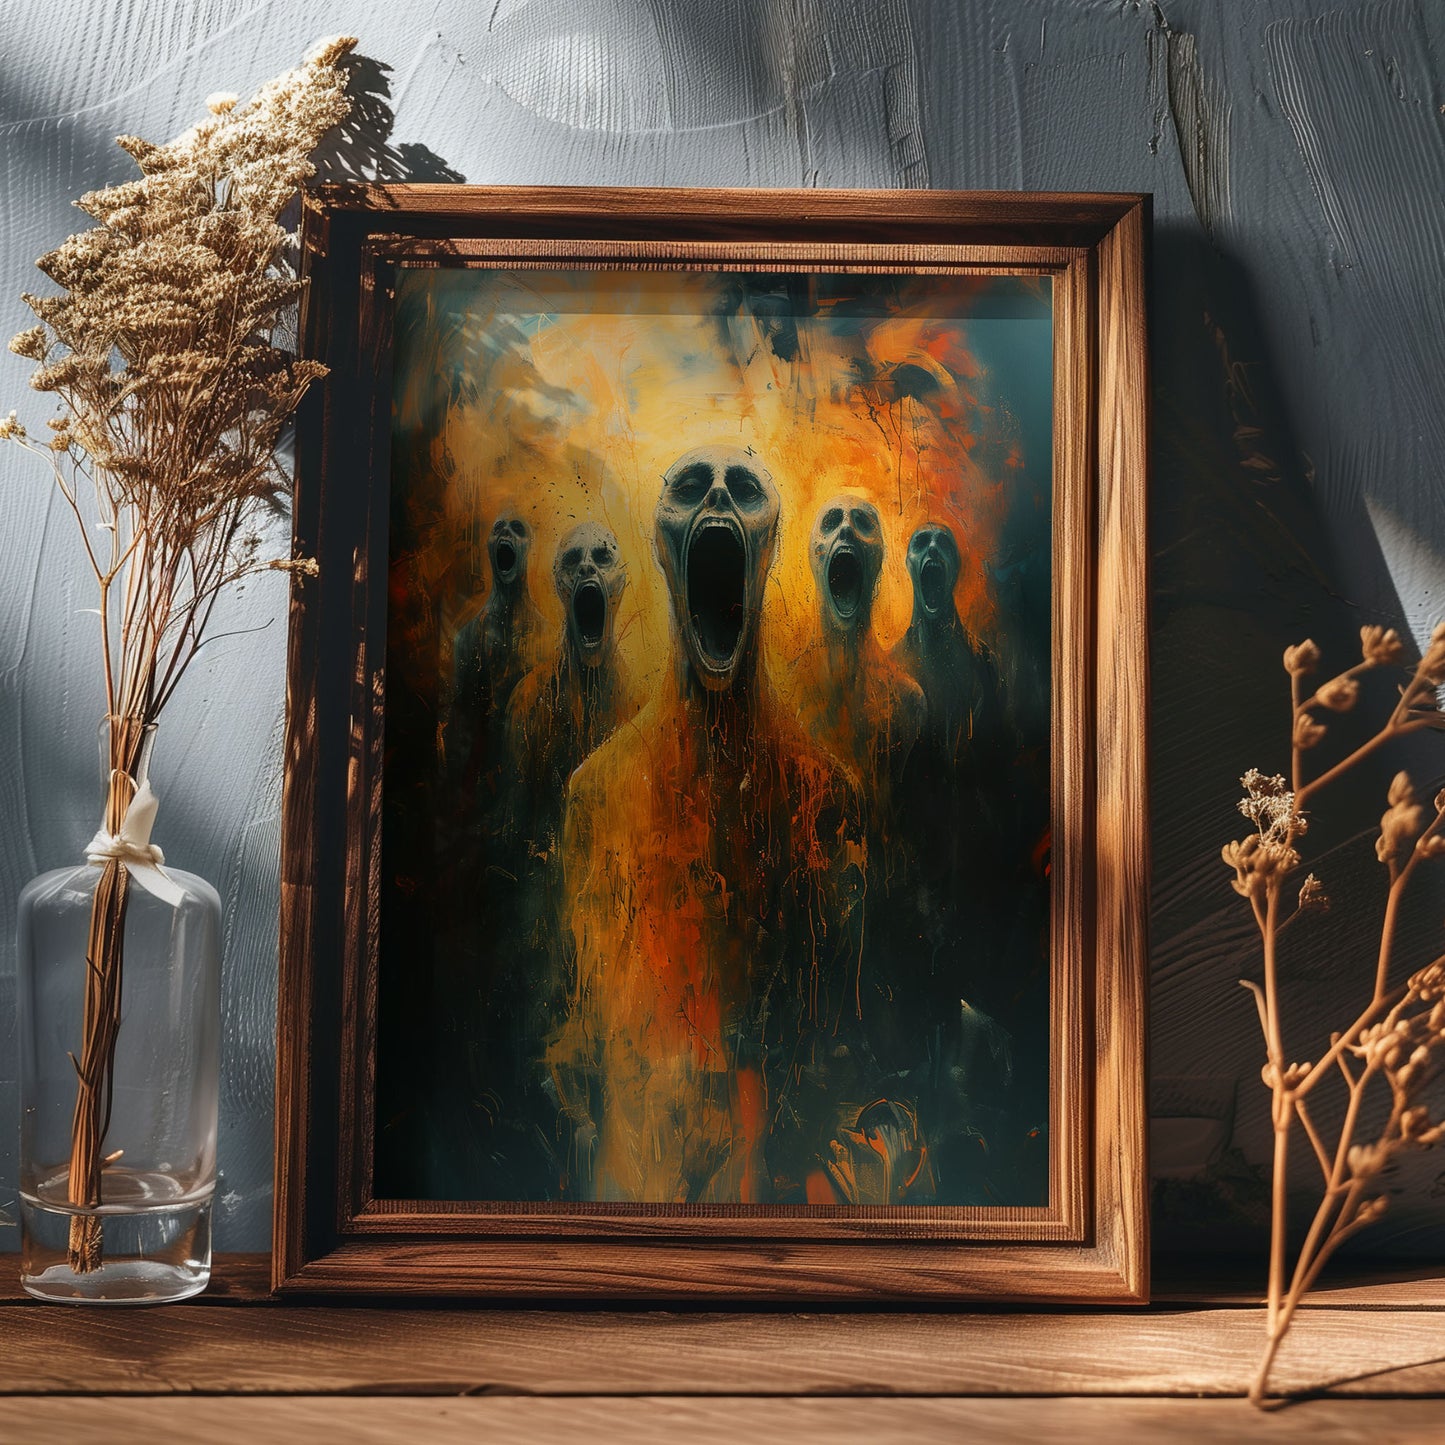 Screams from Hell Poster - Dark Gothic Painting - Horror Art Print